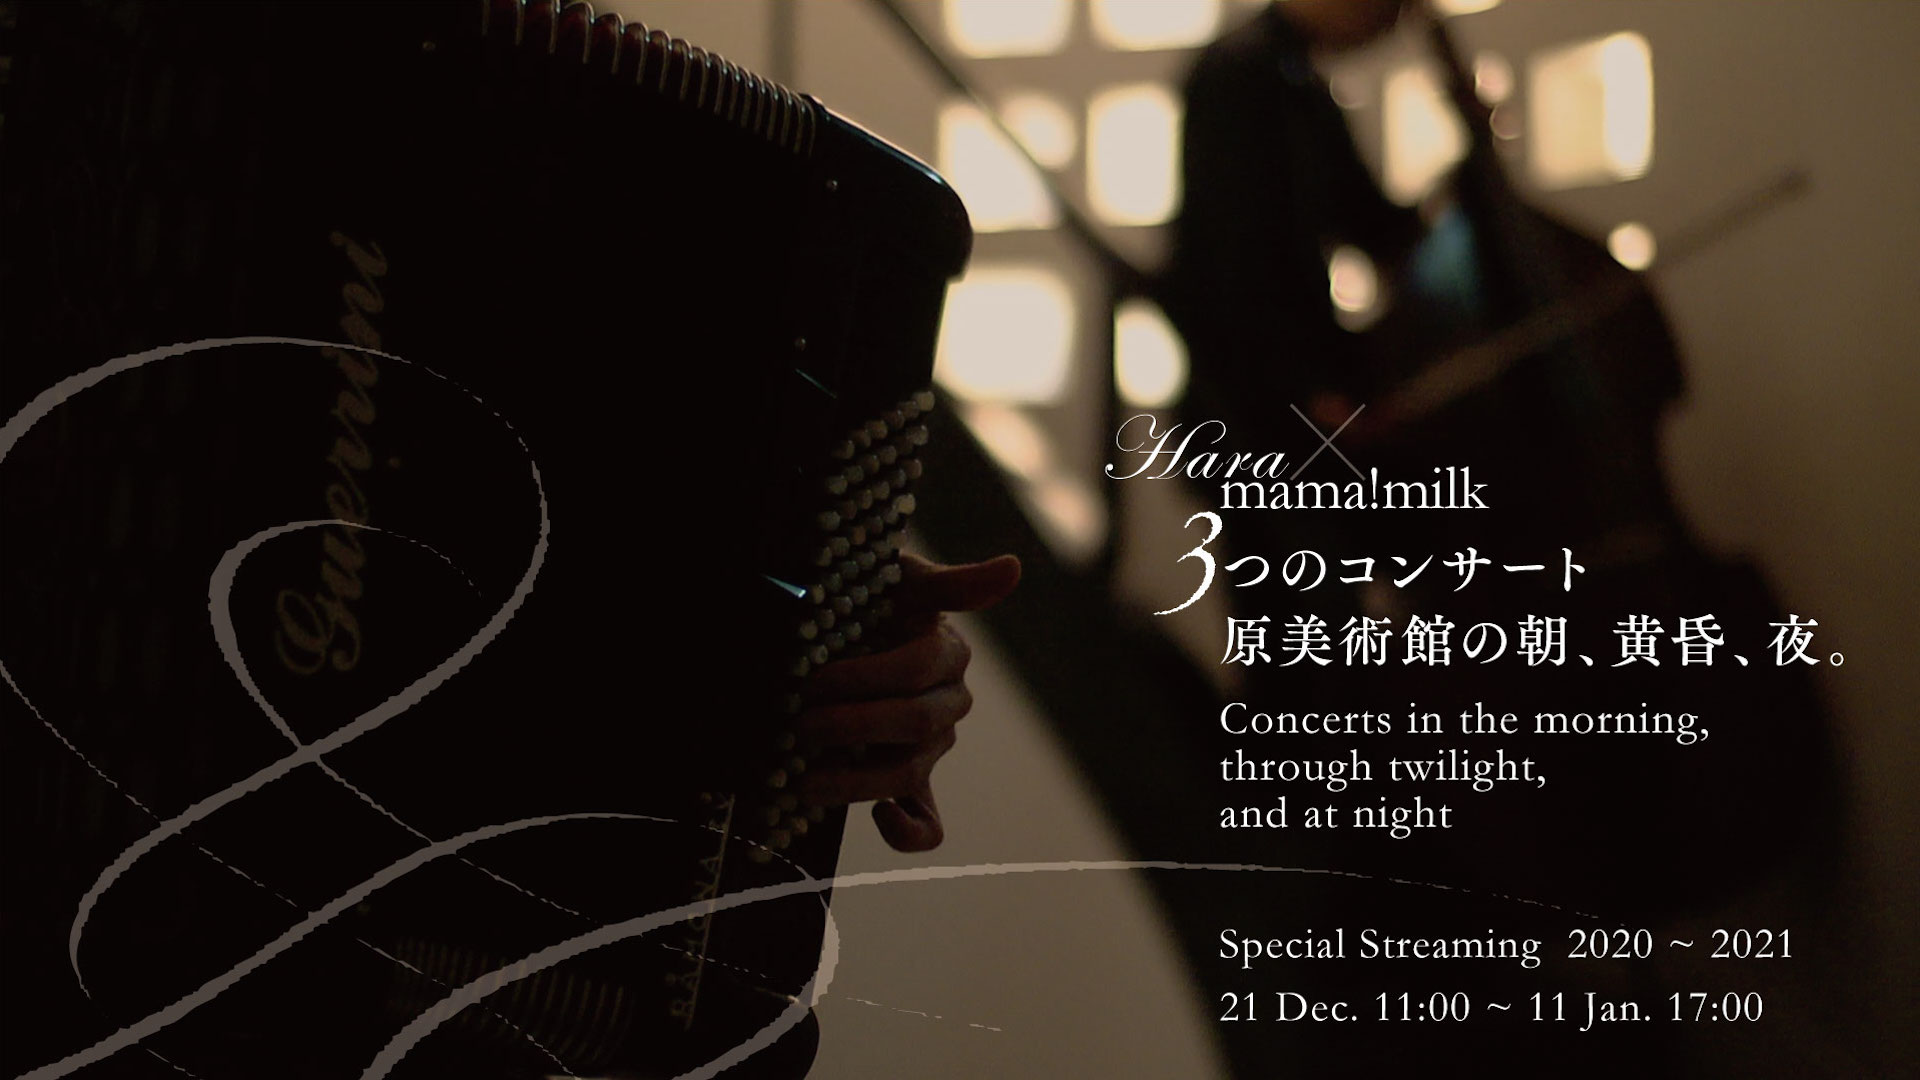 Hara X mama!milk ３つのコンサート「原美術館の朝、黄昏、夜」 Concerts in the morning, through twilight, and at night